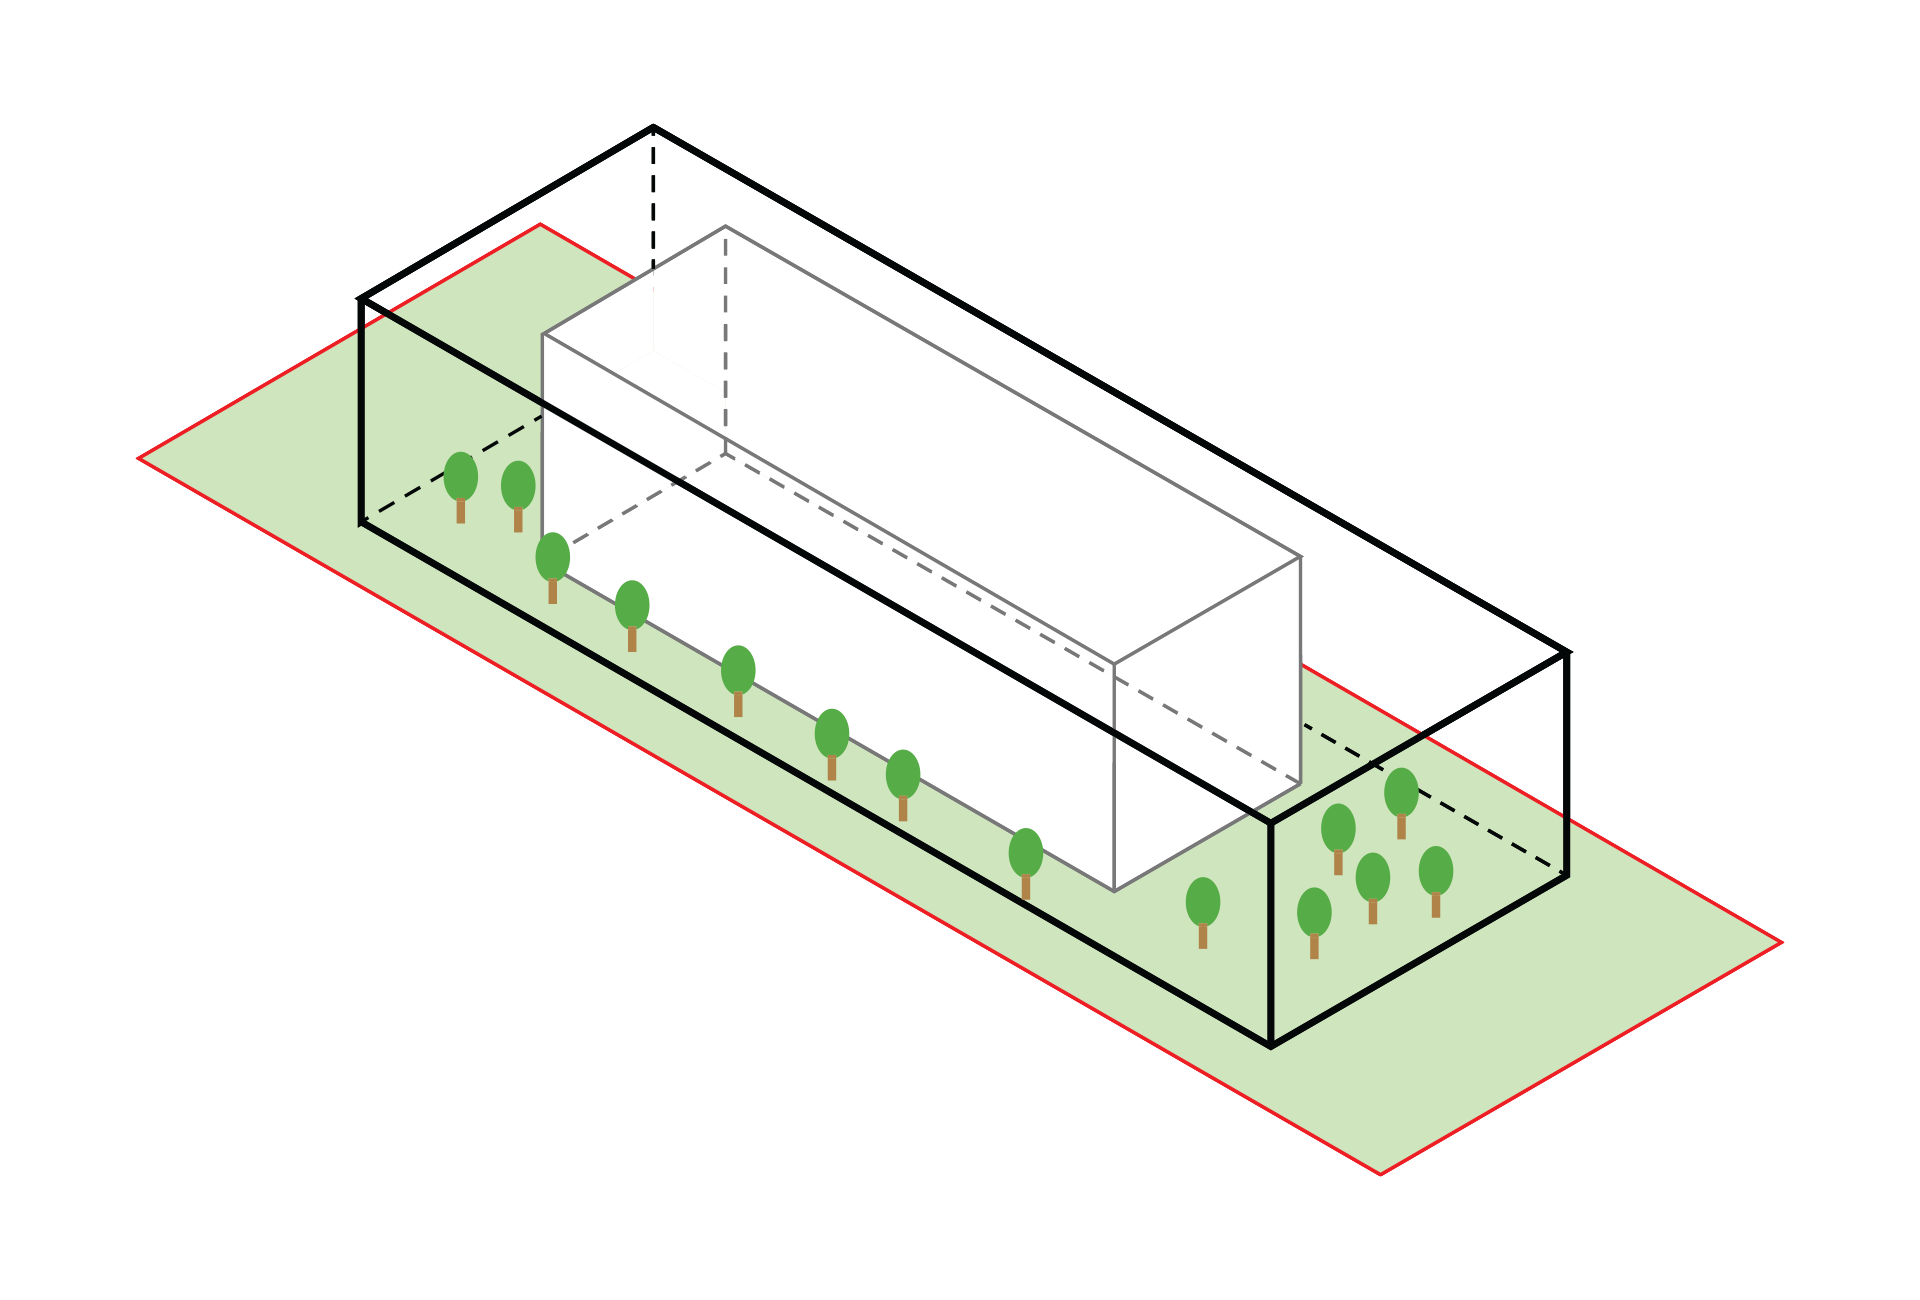 3. Nested within this green expanse is a smaller “box,” housing a flexible workspace and social interactive plateau, promoting collaboration and interaction.